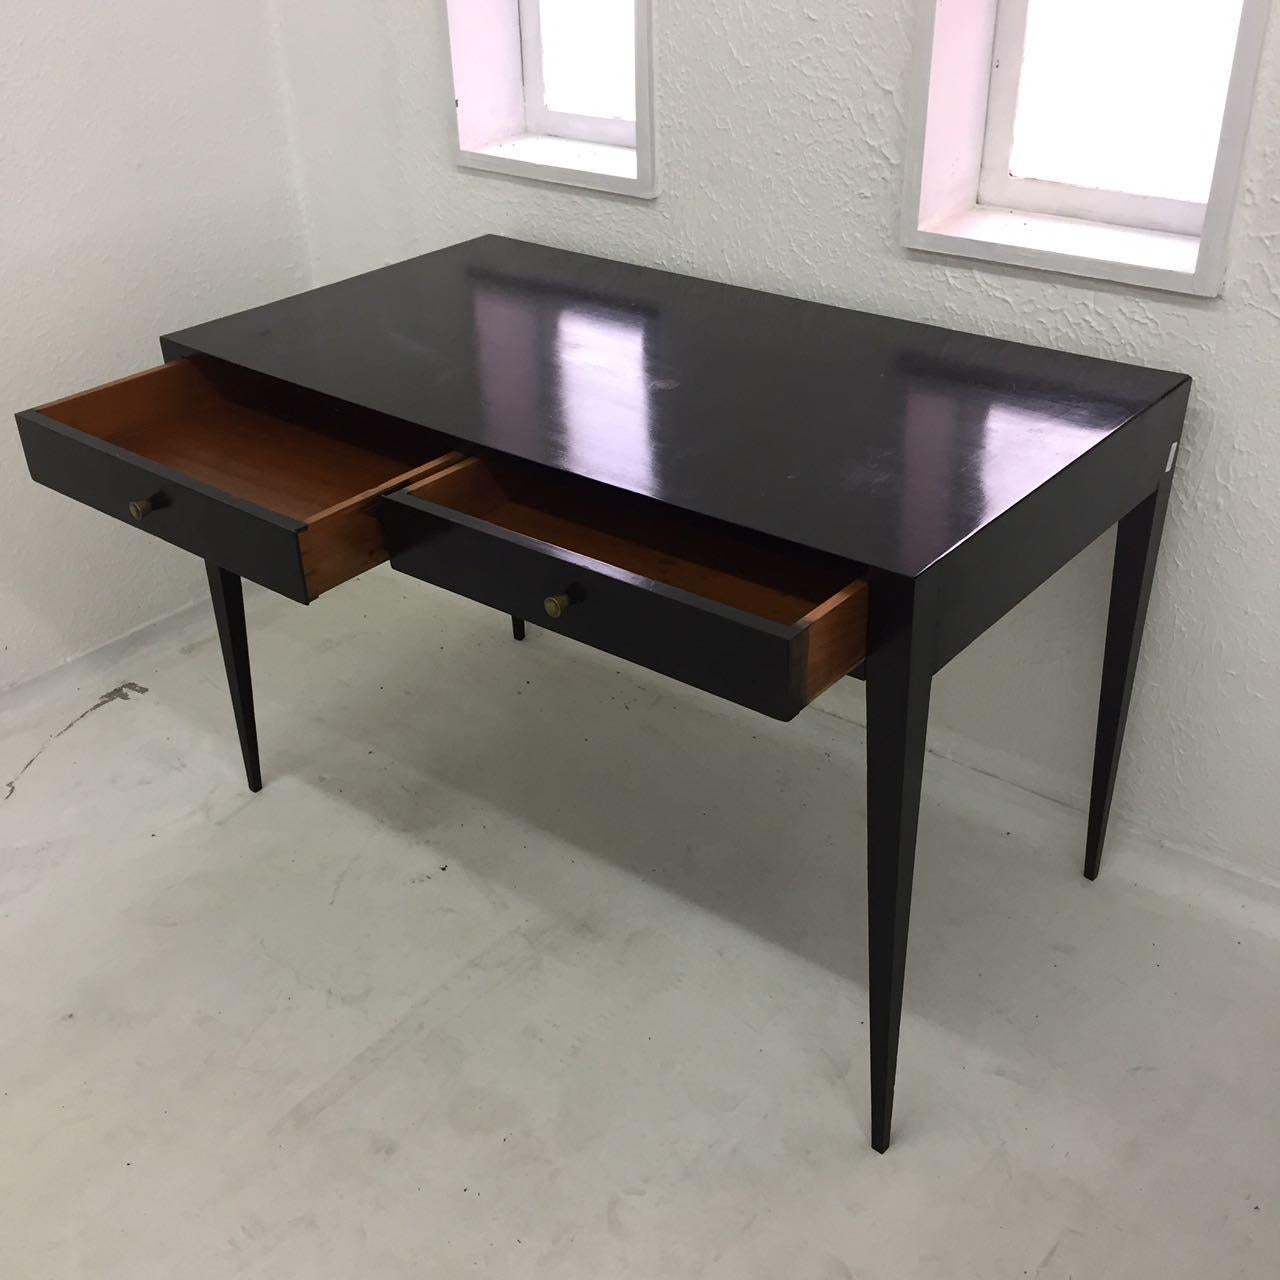 Freestanding Joaquim Tenreiro desk in ebonized wood with two integrated drawers. Designed circa 1950, Brazil. An iconic piece of furniture from the golden age of Brazilian design.